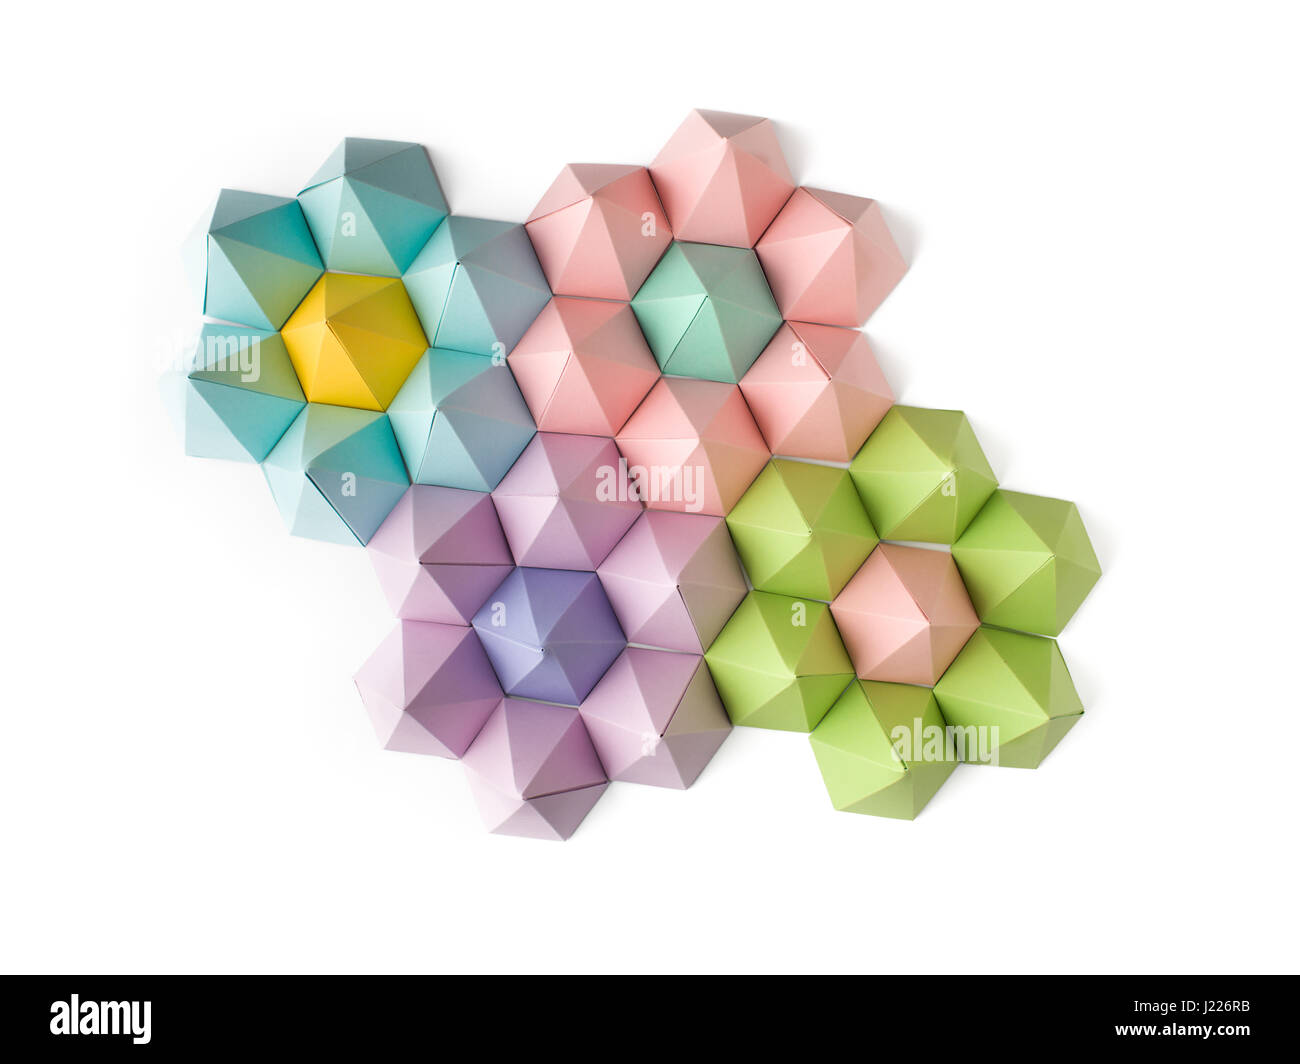 Abstract origami flowers made of hexagonal paper pyramids Stock Photo